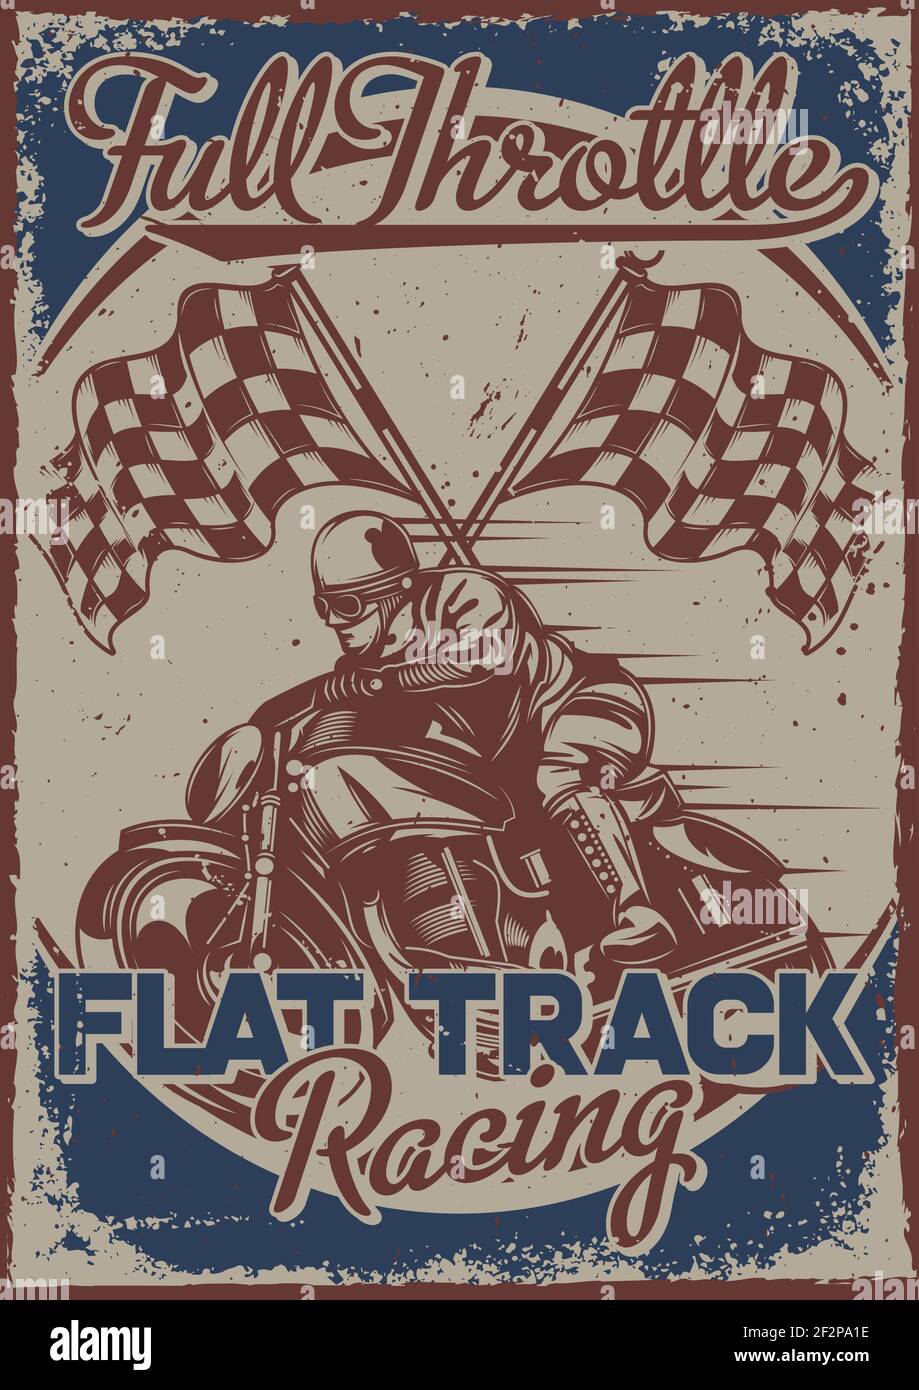 Poster design with illustration of a racer with flags on vintage background. Stock Vector